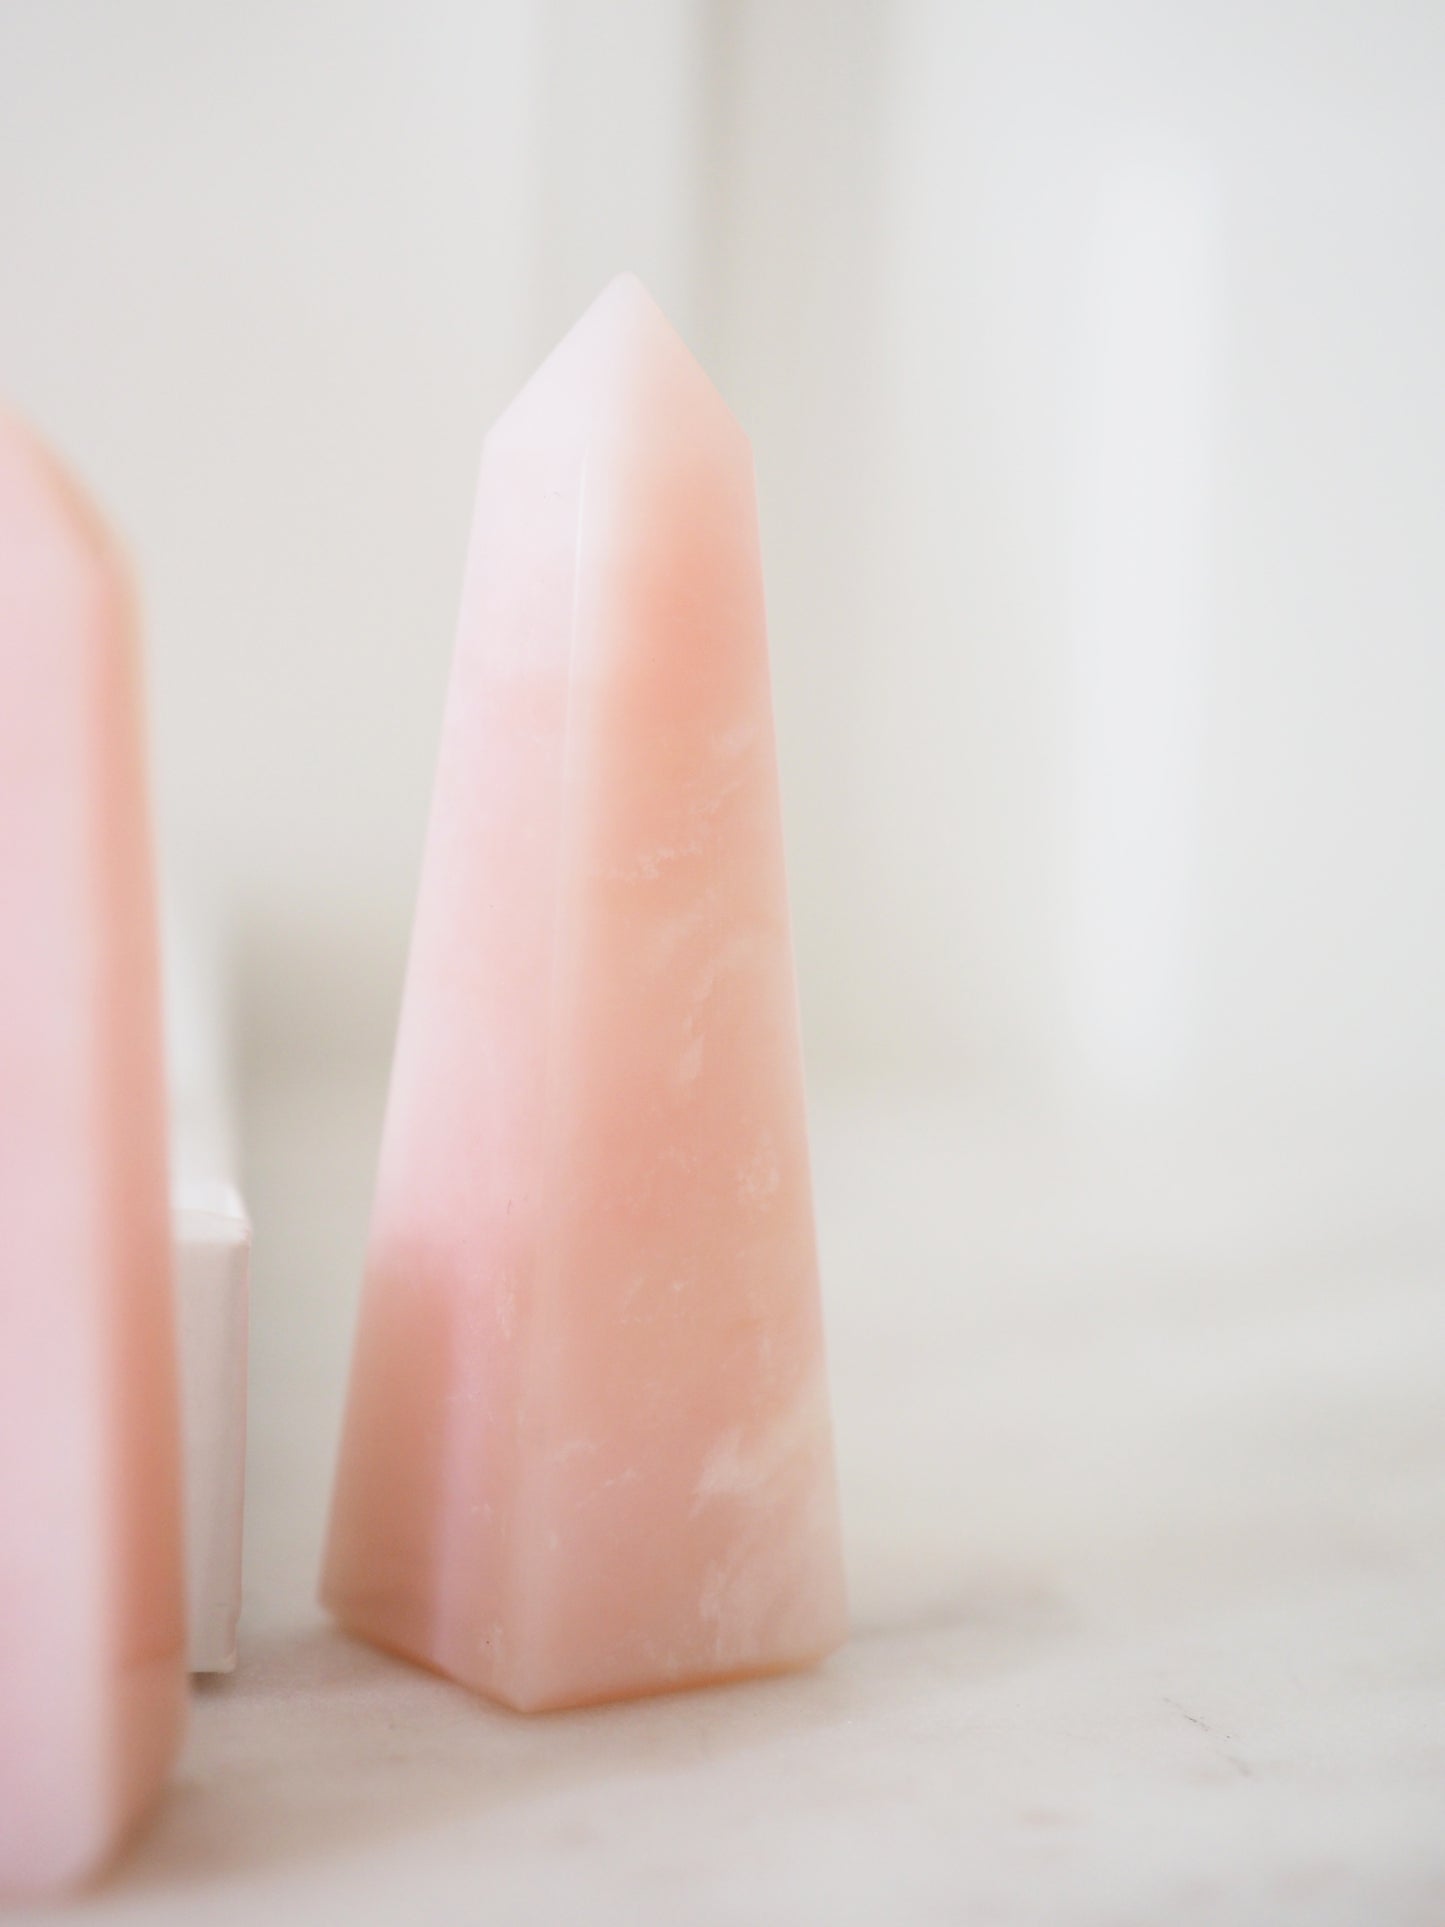 Pinker Andenopal Mini Spitze  . Pink Andes Opal Mini Point ca.xx cm -  Peru HIGH QUALITY Hand Carved